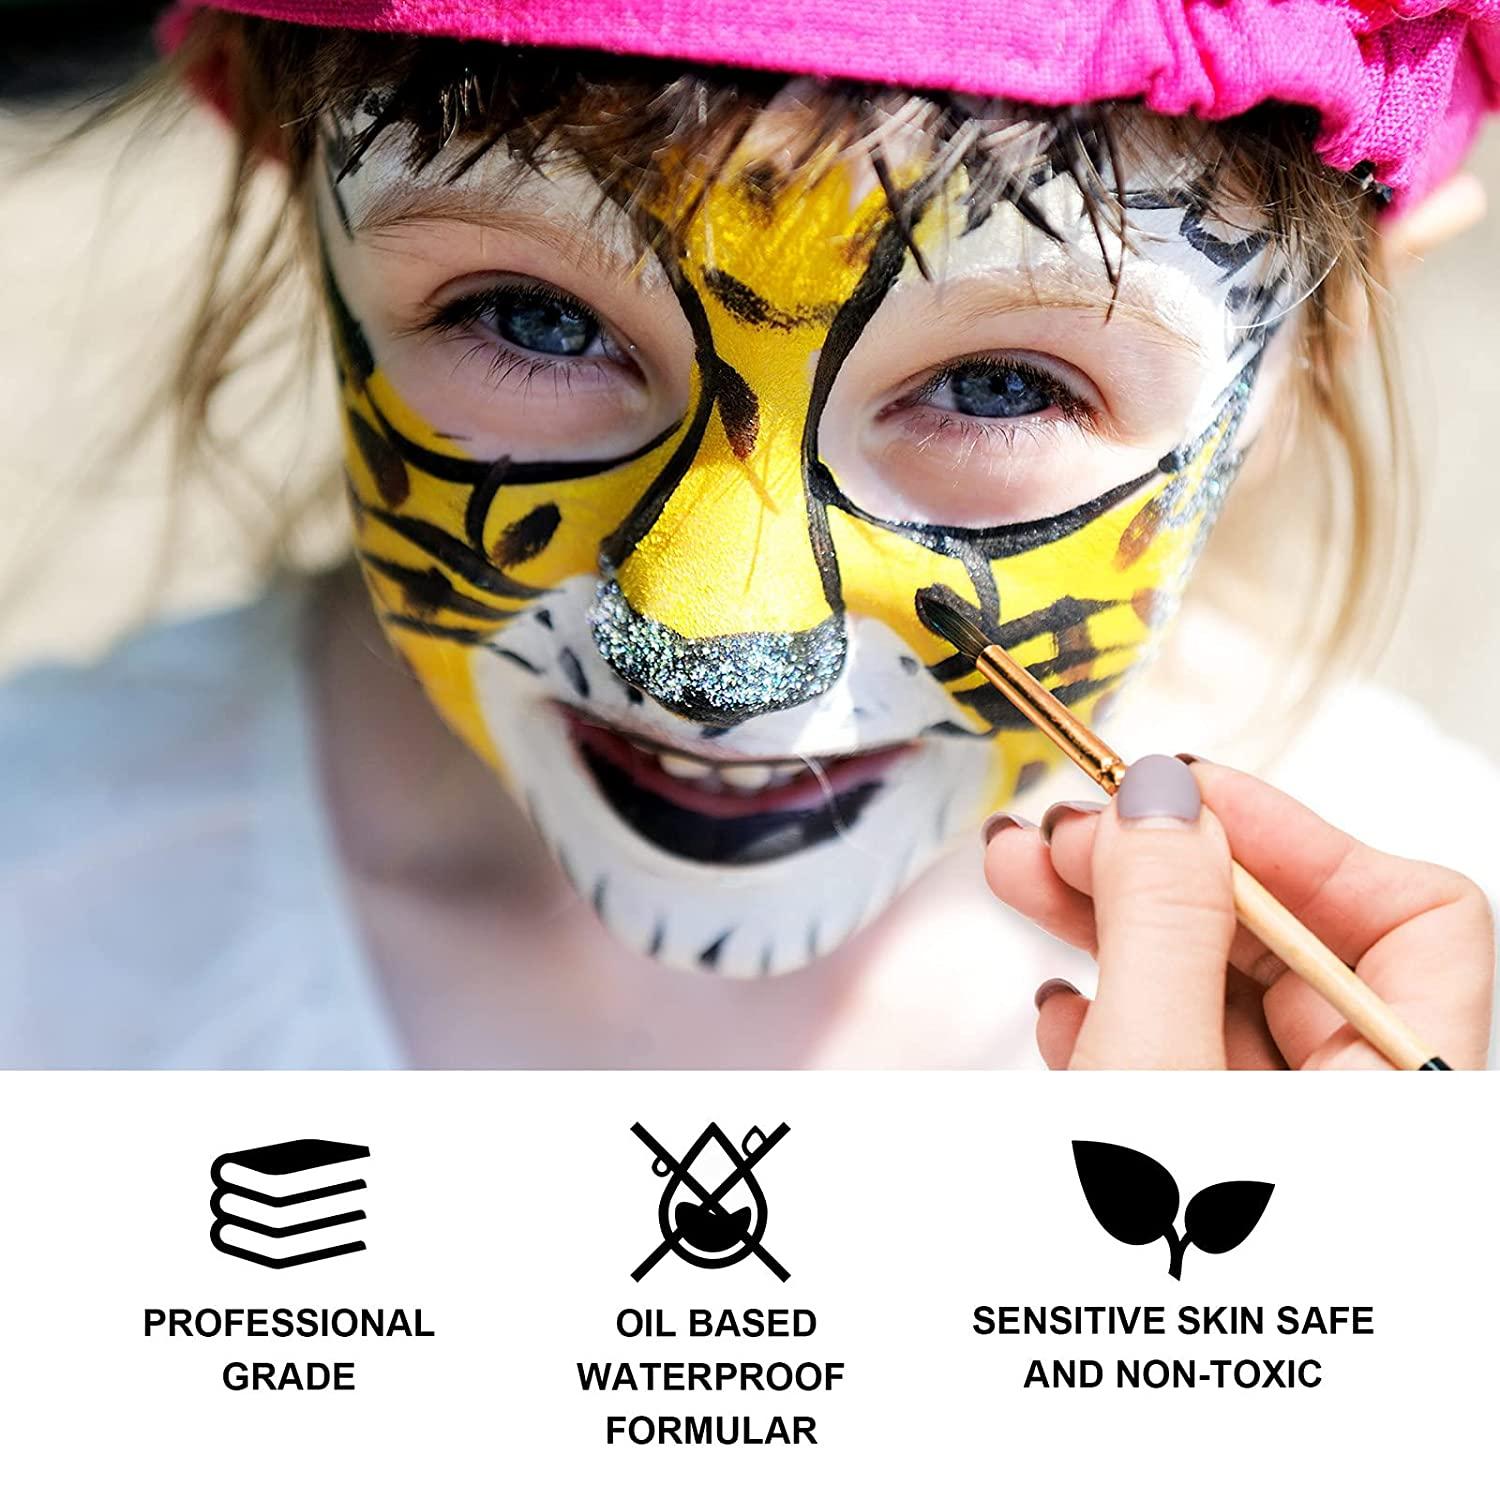  Black White Face Body Paint,Face Painting Kit for Halloween  Clown Cosplay SFX Makeup,Body Paints for Adults Special Effects Makeup Face  Paint Kit with Two Brushes : Beauty & Personal Care